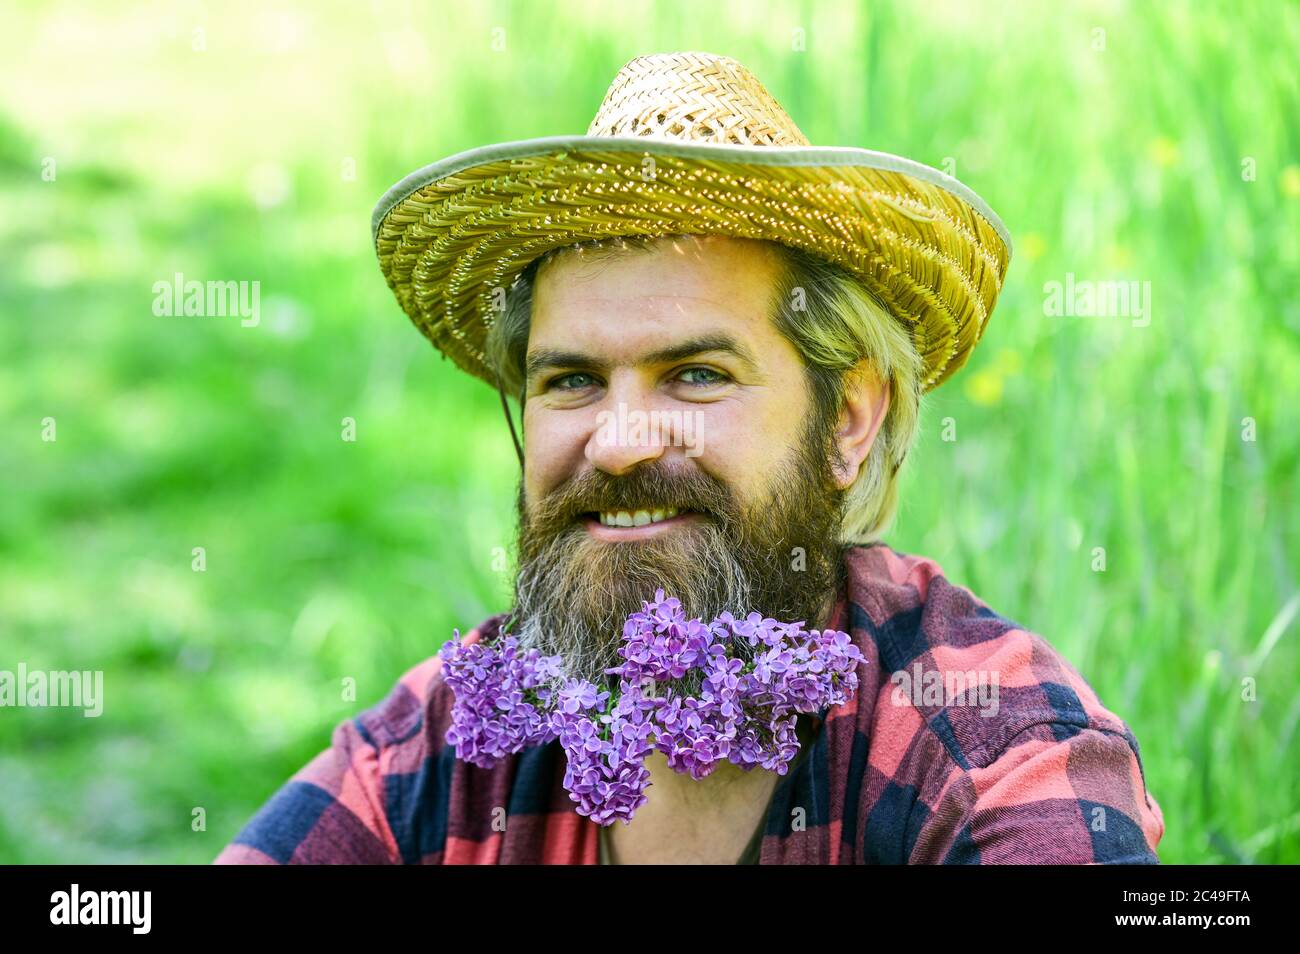 https://c8.alamy.com/comp/2C49FTA/rustic-man-with-beard-happy-face-enjoy-life-in-ecological-environment-hipster-with-lilac-flowers-looks-happy-bearded-man-with-lilac-in-beard-green-grass-background-eco-friendly-lifestyle-concept-2C49FTA.jpg